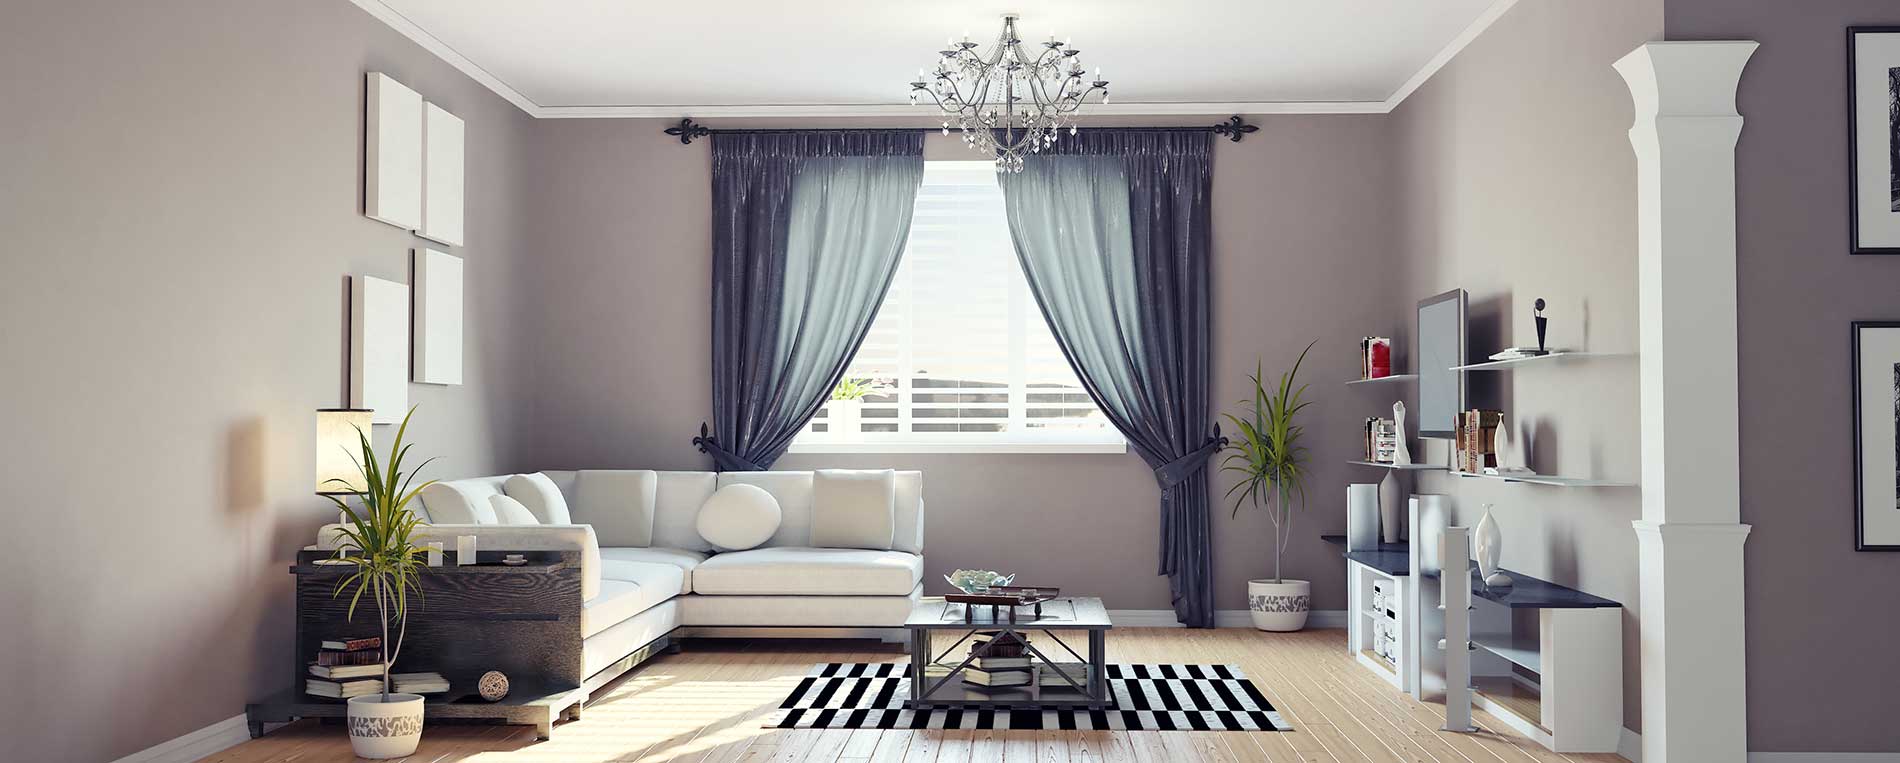 Are Roman Shades Right For You?